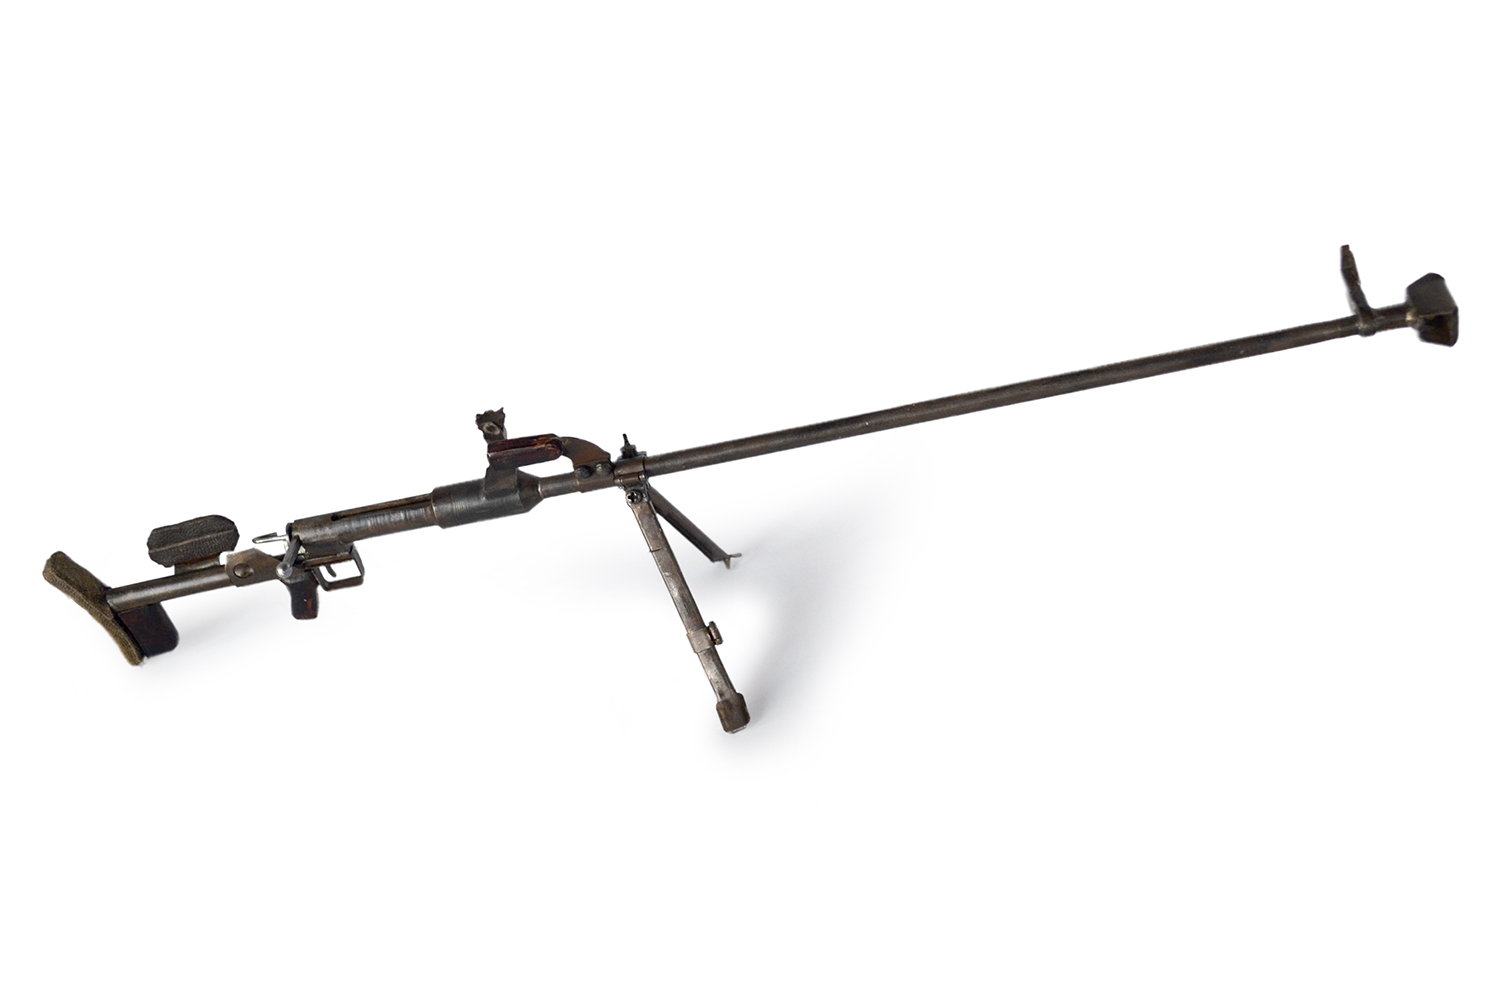 PTRD 40 Anti-Tank rifle on a scale of 1:5